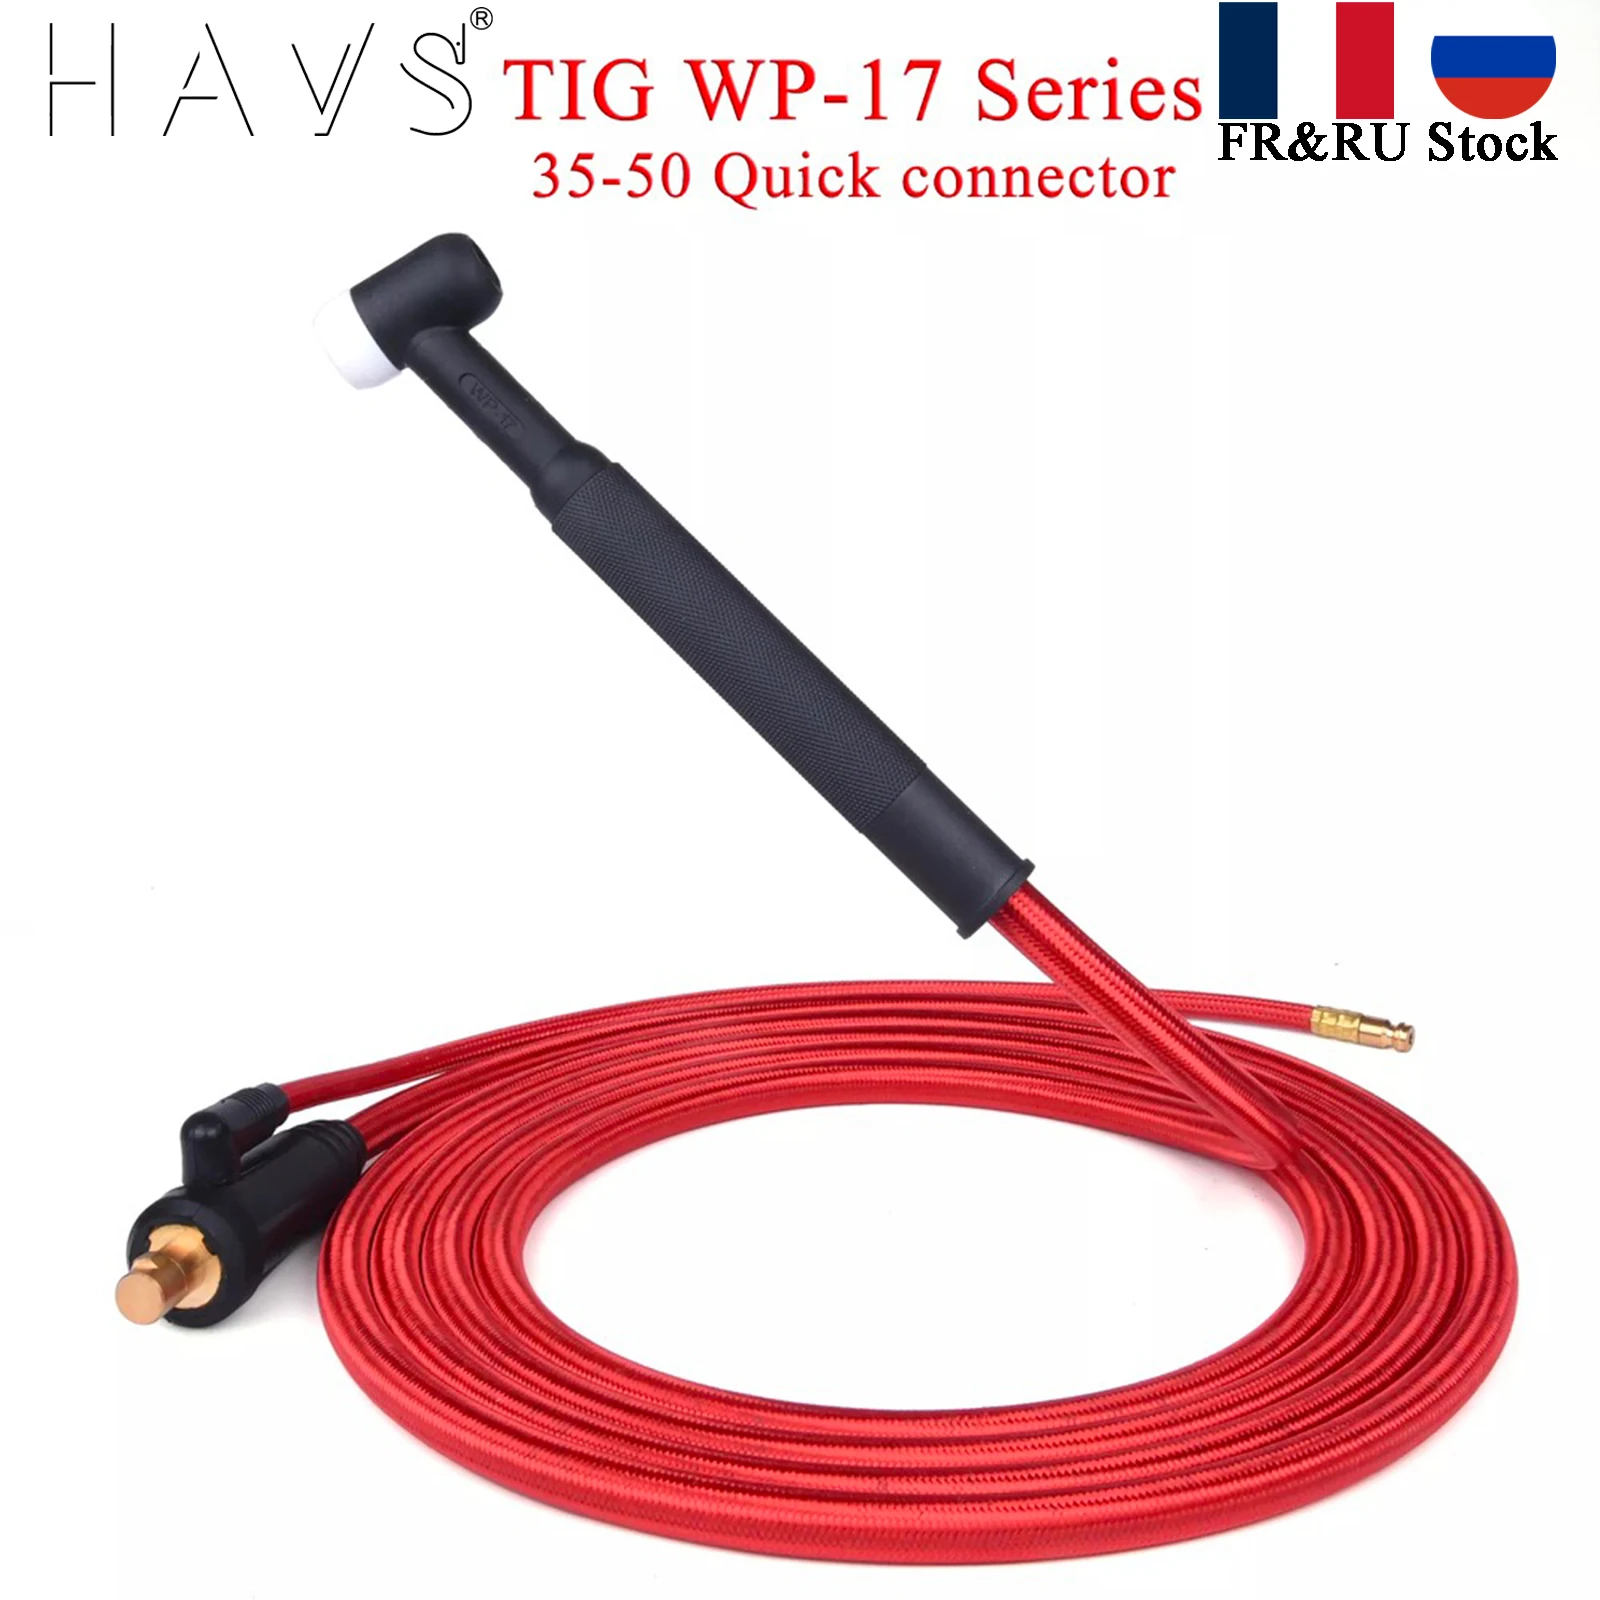 4M/13ft 7.8M/25.6ft WP17 TIG Welding Torch Gas-Electric Integrated Hose Cable Wires 5/8 UNF Quick 35-50 Euro Connector